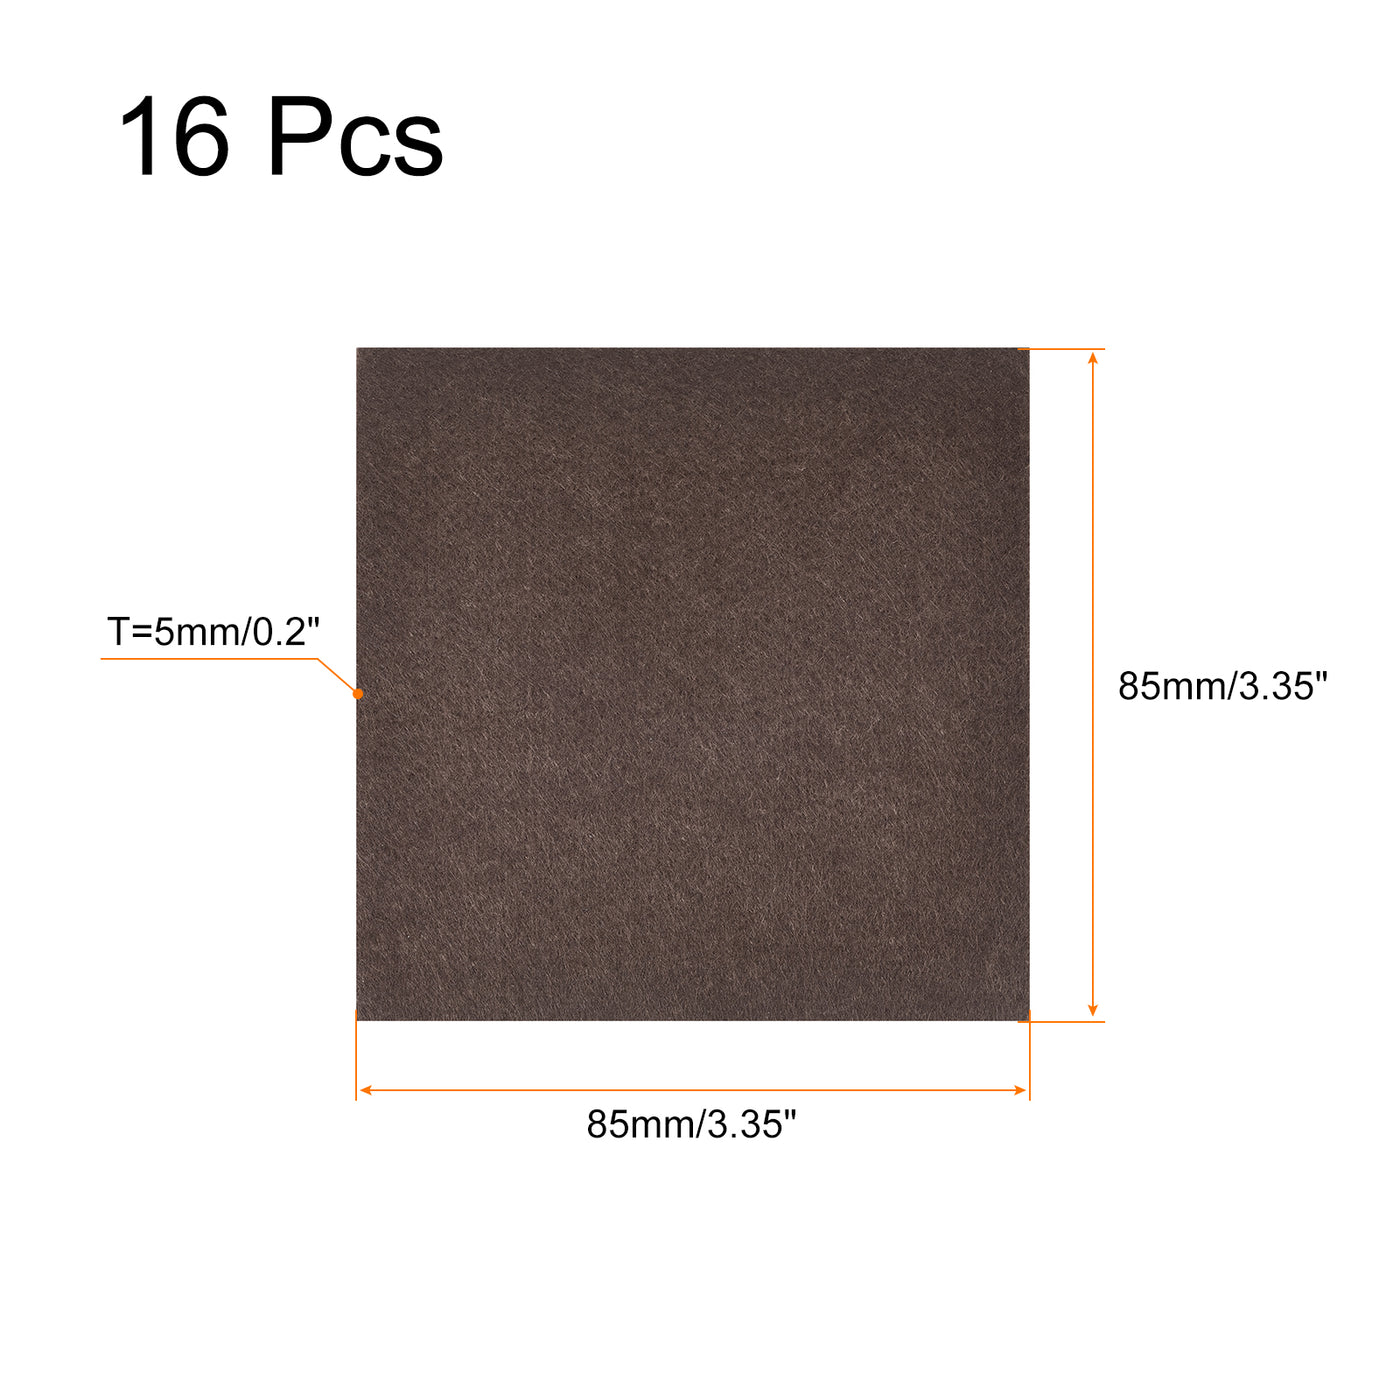 uxcell Uxcell Felt Furniture Pads, 85mm x 85mm Self Adhesive Square Floor Protectors for Furniture Legs Hardwood Floor, Brown 16Pcs